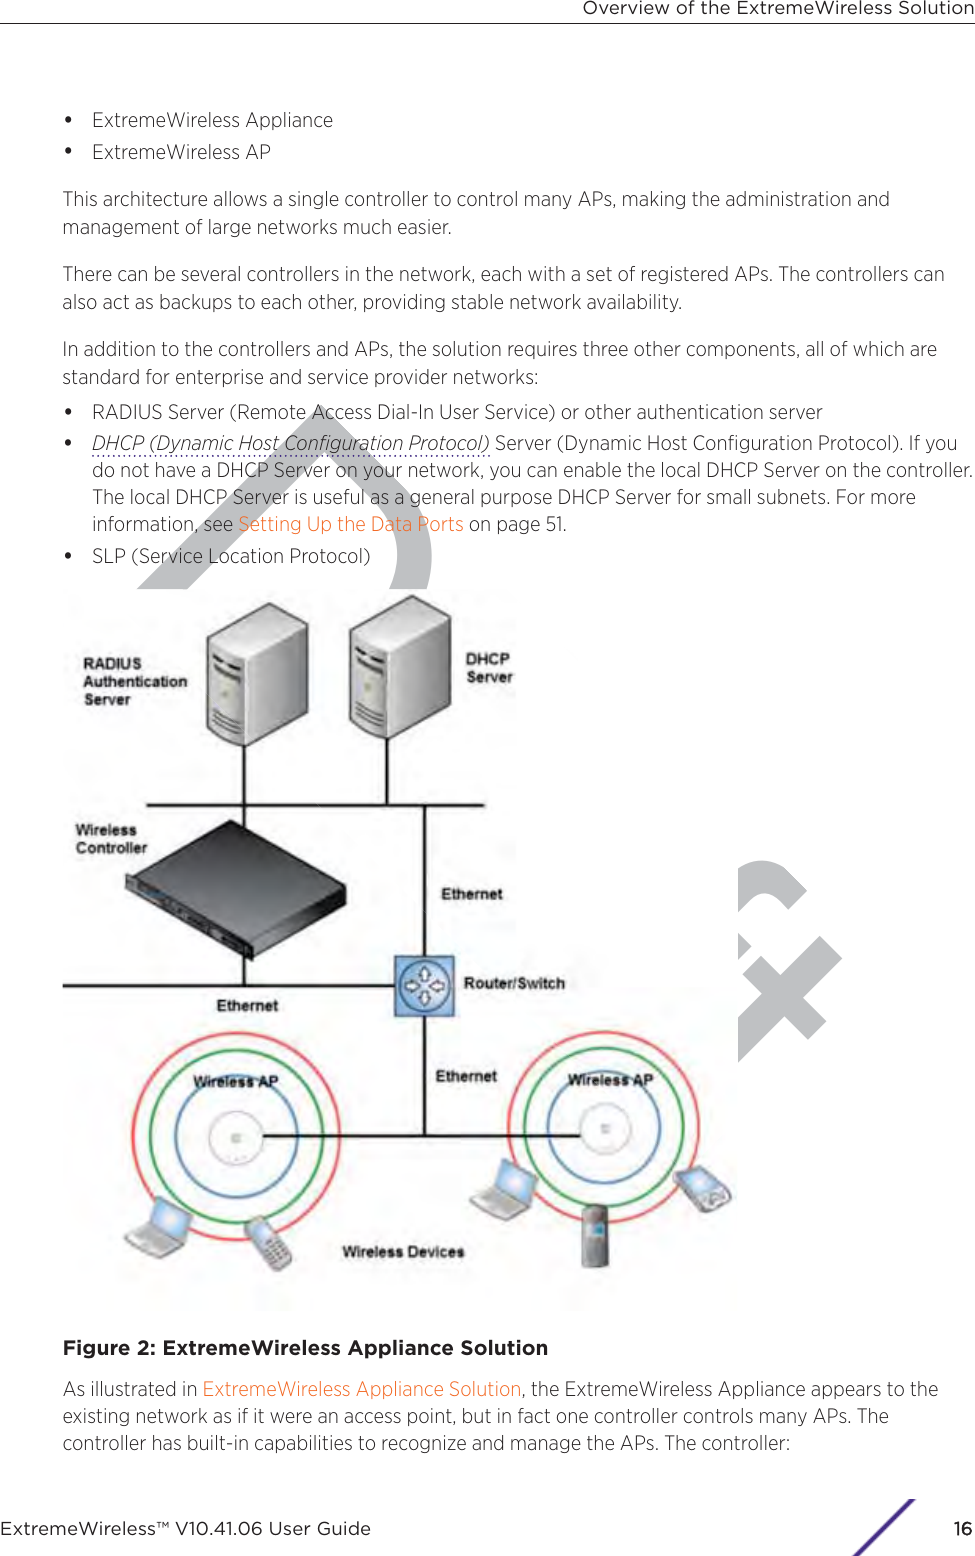 Draft•ExtremeWireless Appliance•ExtremeWireless APThis architecture allows a single controller to control many APs, making the administration andmanagement of large networks much easier.There can be several controllers in the network, each with a set of registered APs. The controllers canalso act as backups to each other, providing stable network availability.In addition to the controllers and APs, the solution requires three other components, all of which arestandard for enterprise and service provider networks:•RADIUS Server (Remote Access Dial-In User Service) or other authentication server•DHCP (Dynamic Host Conﬁguration Protocol) Server (Dynamic Host Conﬁguration Protocol). If youdo not have a DHCP Server on your network, you can enable the local DHCP Server on the controller.The local DHCP Server is useful as a general purpose DHCP Server for small subnets. For moreinformation, see Setting Up the Data Ports on page 51.•SLP (Service Location Protocol)Figure 2: ExtremeWireless Appliance SolutionAs illustrated in ExtremeWireless Appliance Solution, the ExtremeWireless Appliance appears to theexisting network as if it were an access point, but in fact one controller controls many APs. Thecontroller has built-in capabilities to recognize and manage the APs. The controller:Overview of the ExtremeWireless SolutionExtremeWireless™ V10.41.06 User Guide16